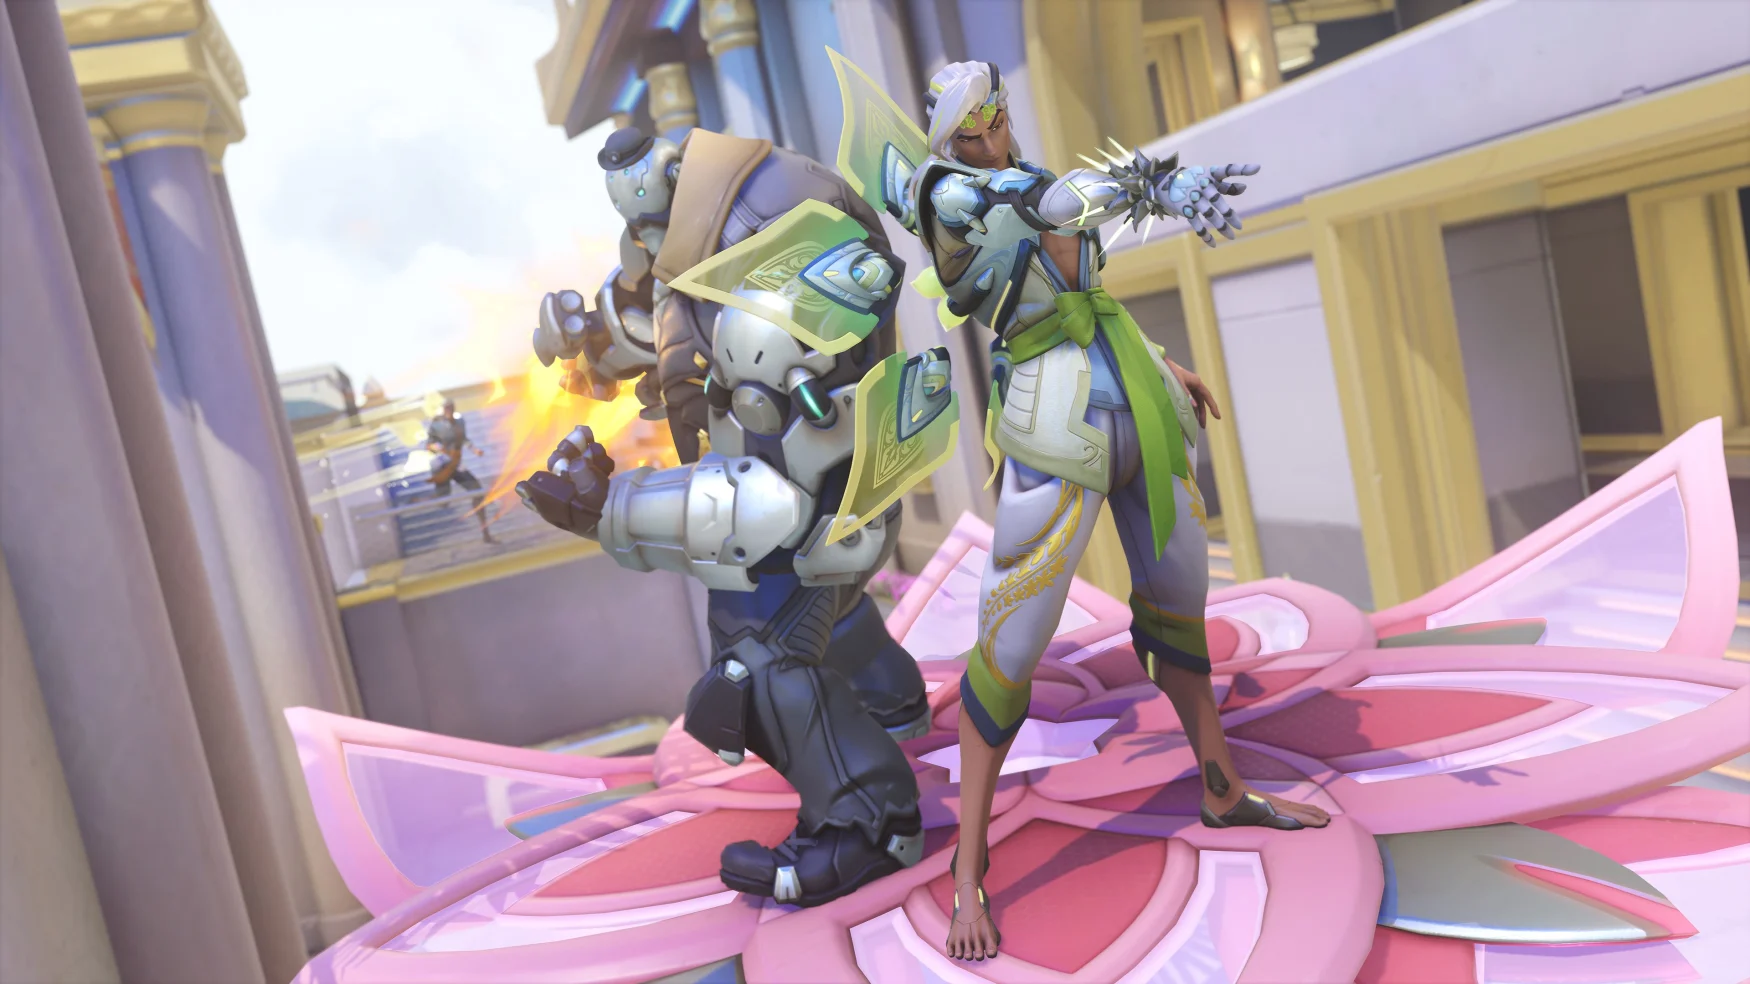 Overwatch 2 screenshot featuring two heroes standing on a large metallic flower petal